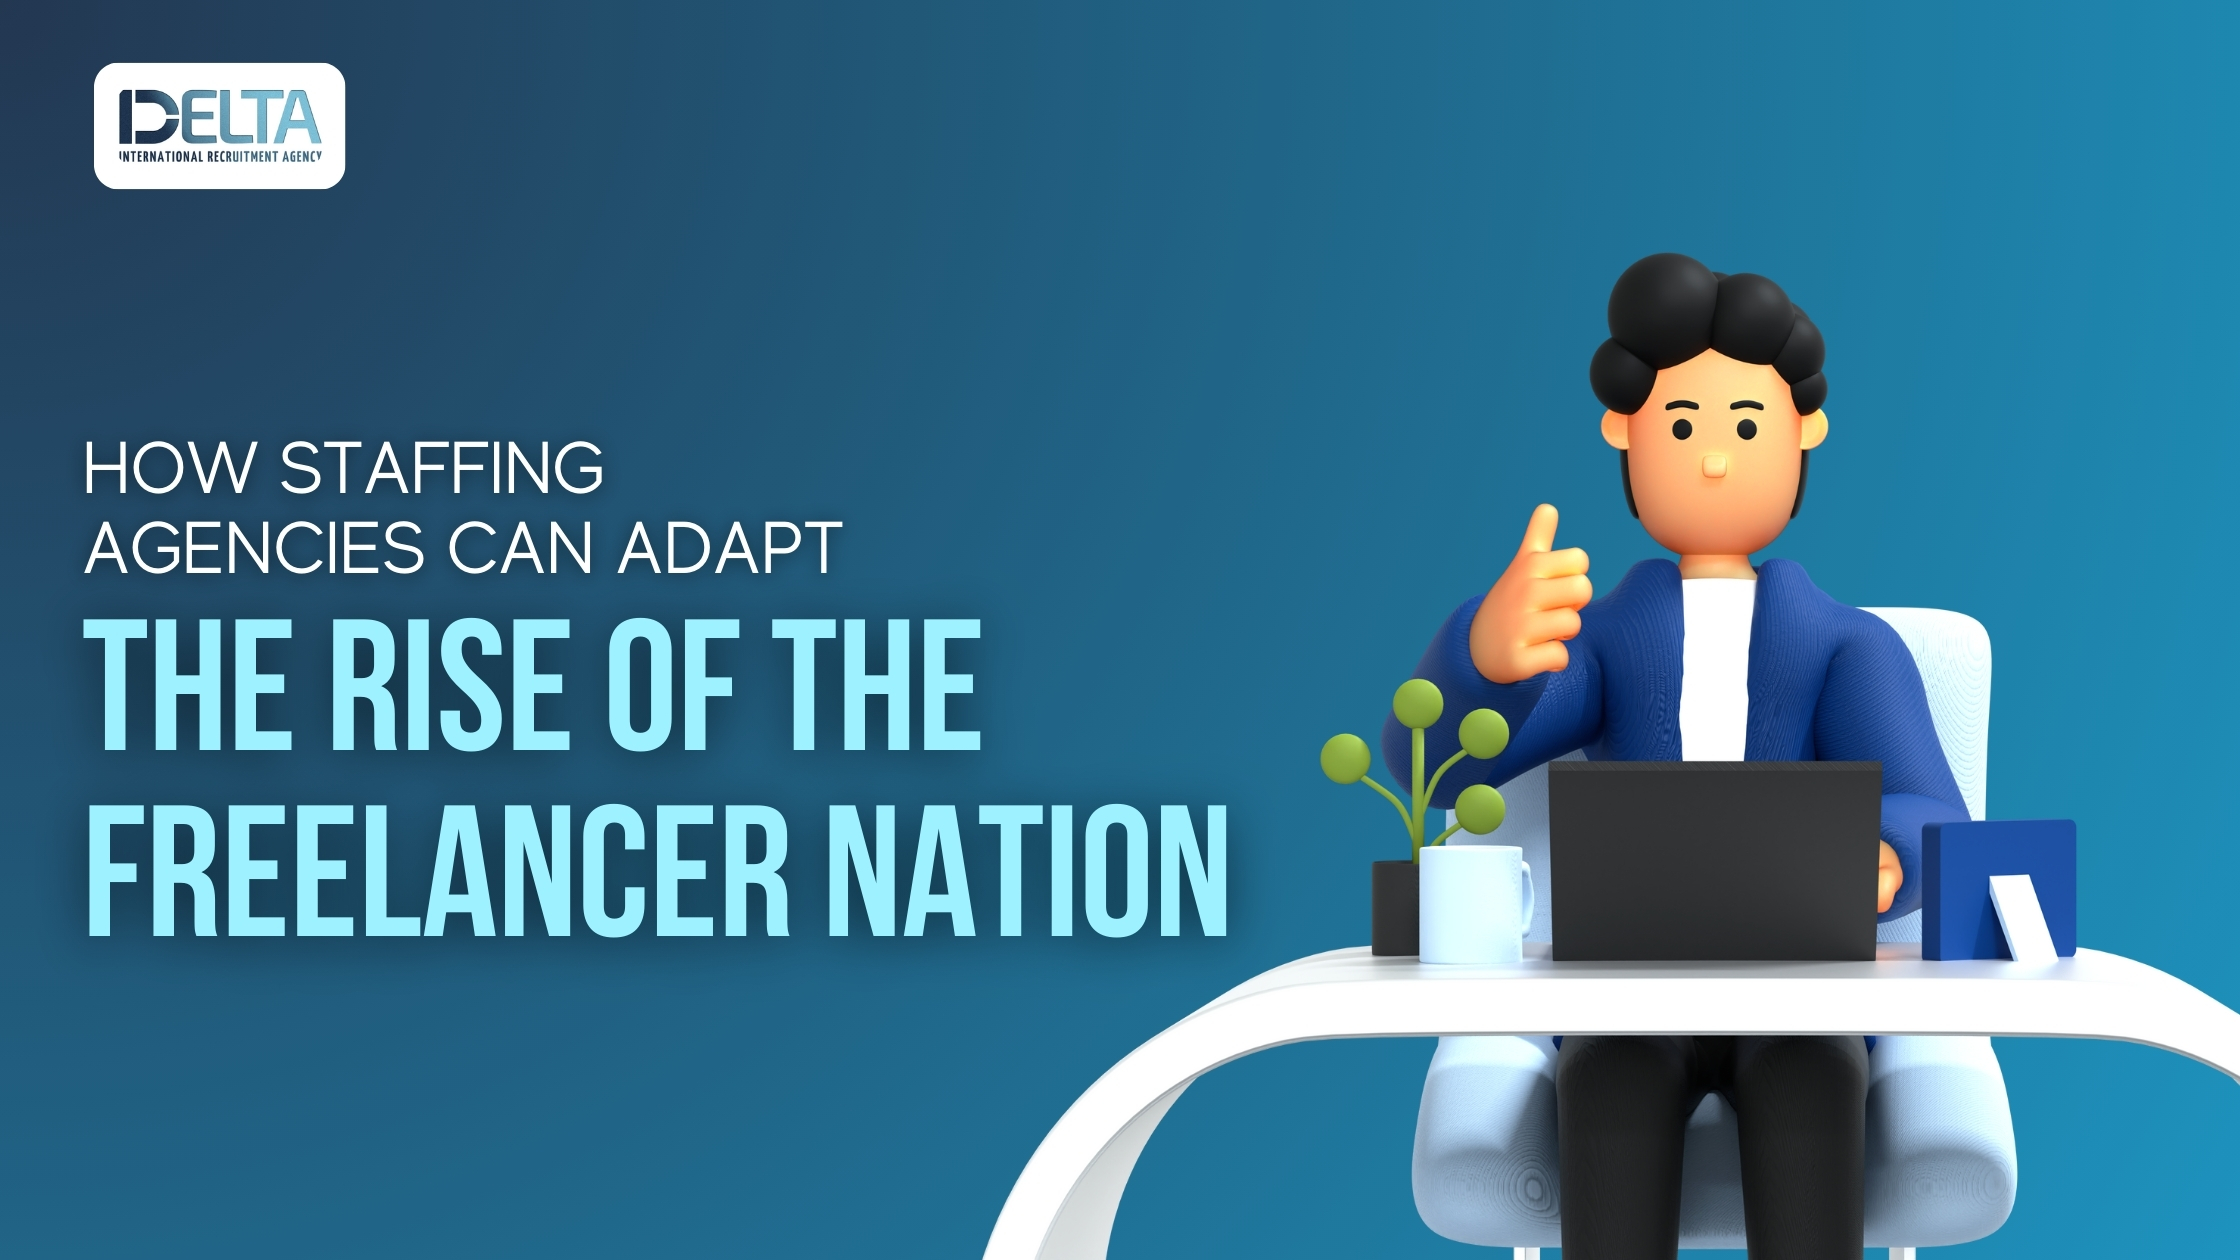 The Rise of the Freelancer Nation: How Staffing Agencies Can Adapt